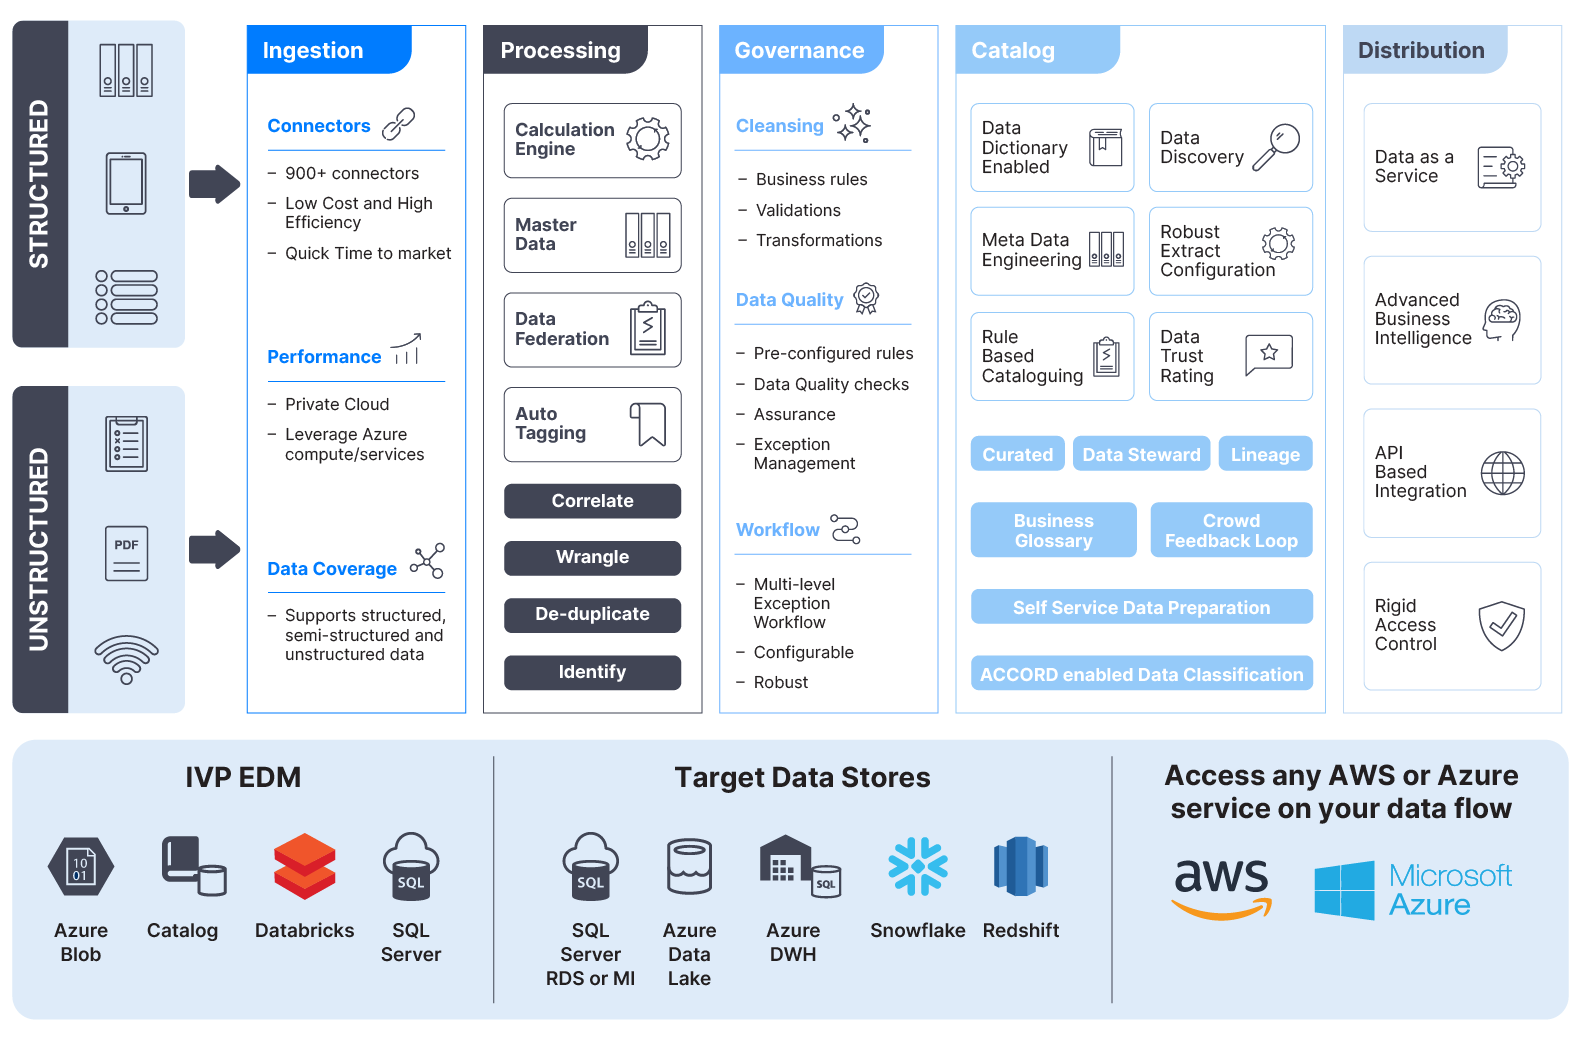 IVP Enterprise Data Management reference architecture for buy-side asset managers.